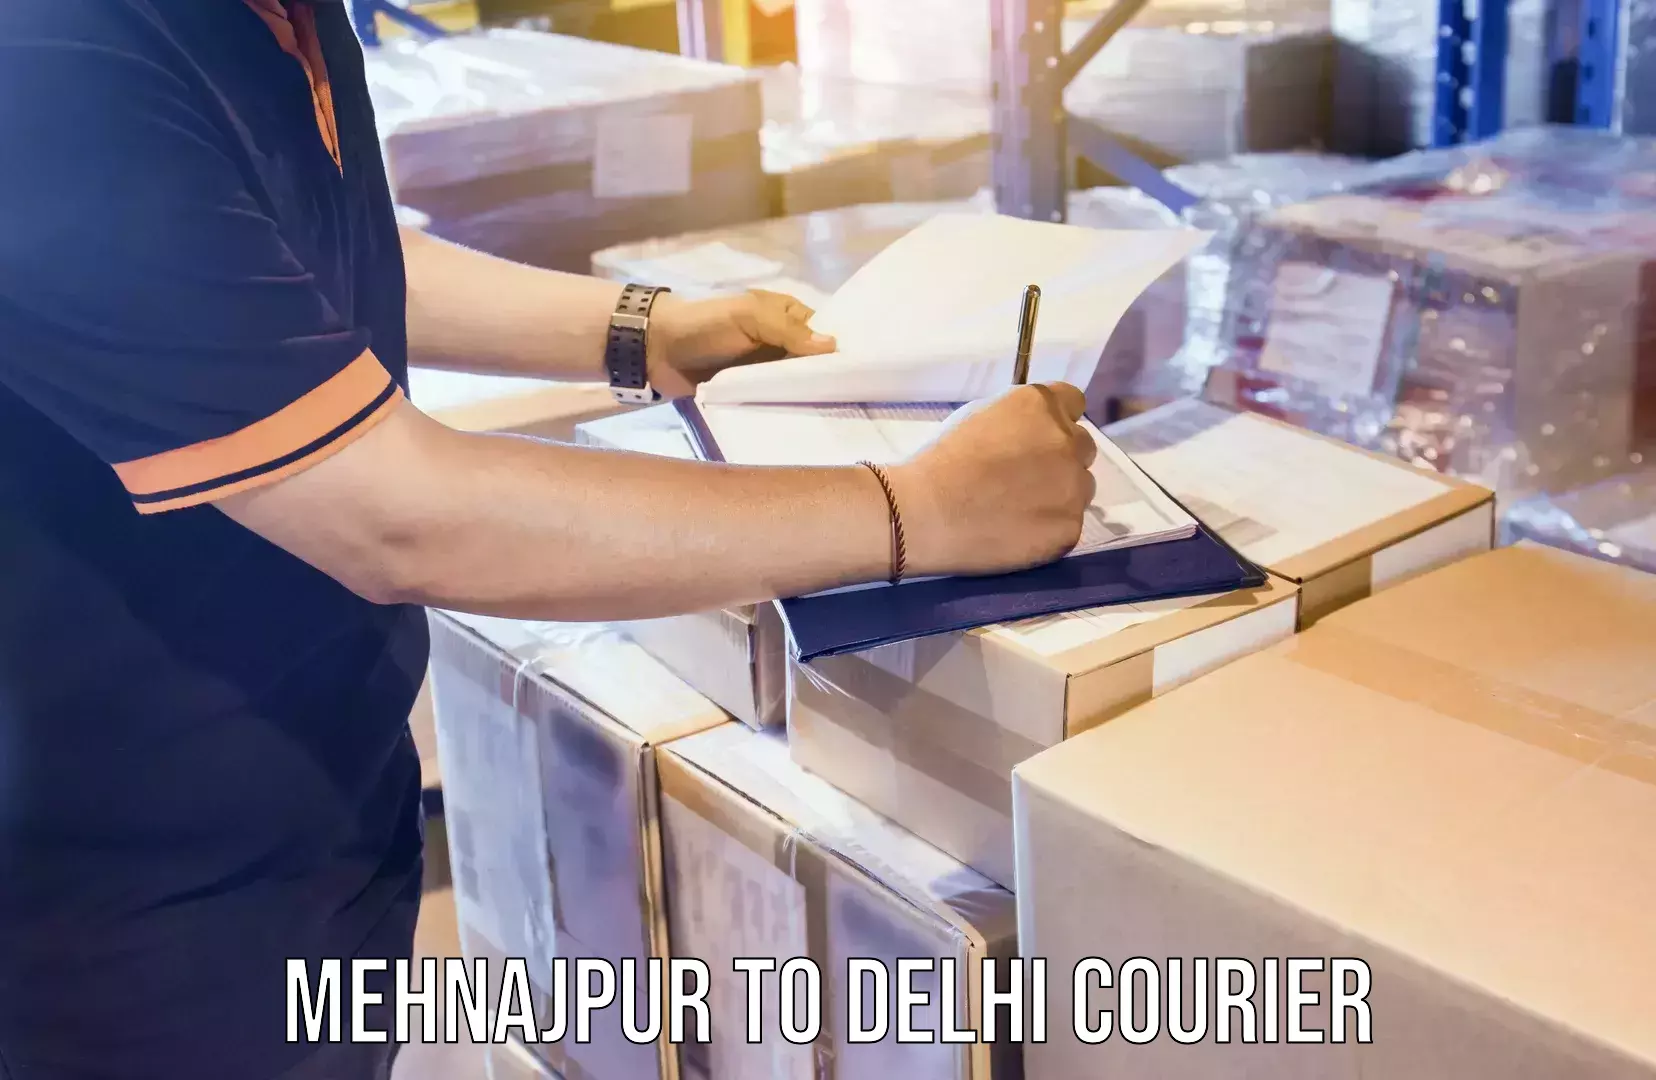 Moving and packing experts Mehnajpur to Delhi